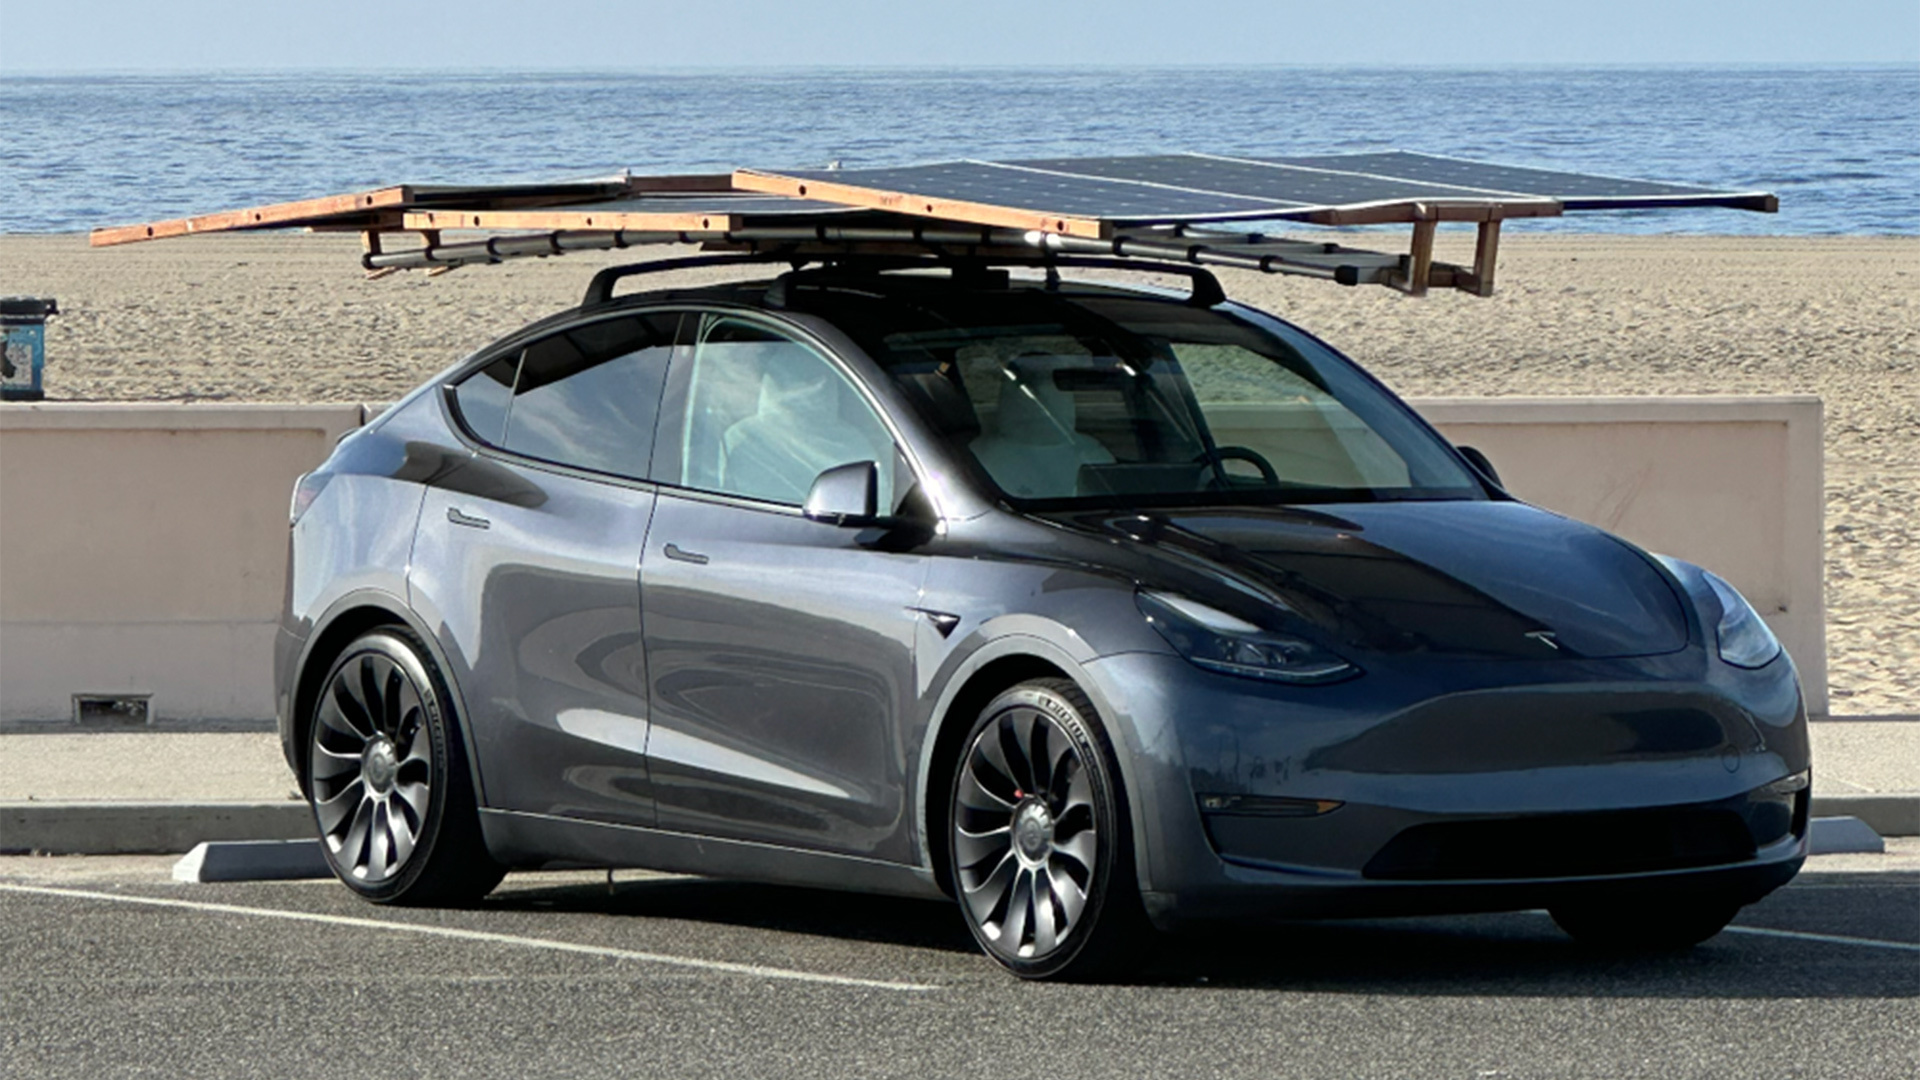 This Tesla Model Y owner waited two years for a car that never